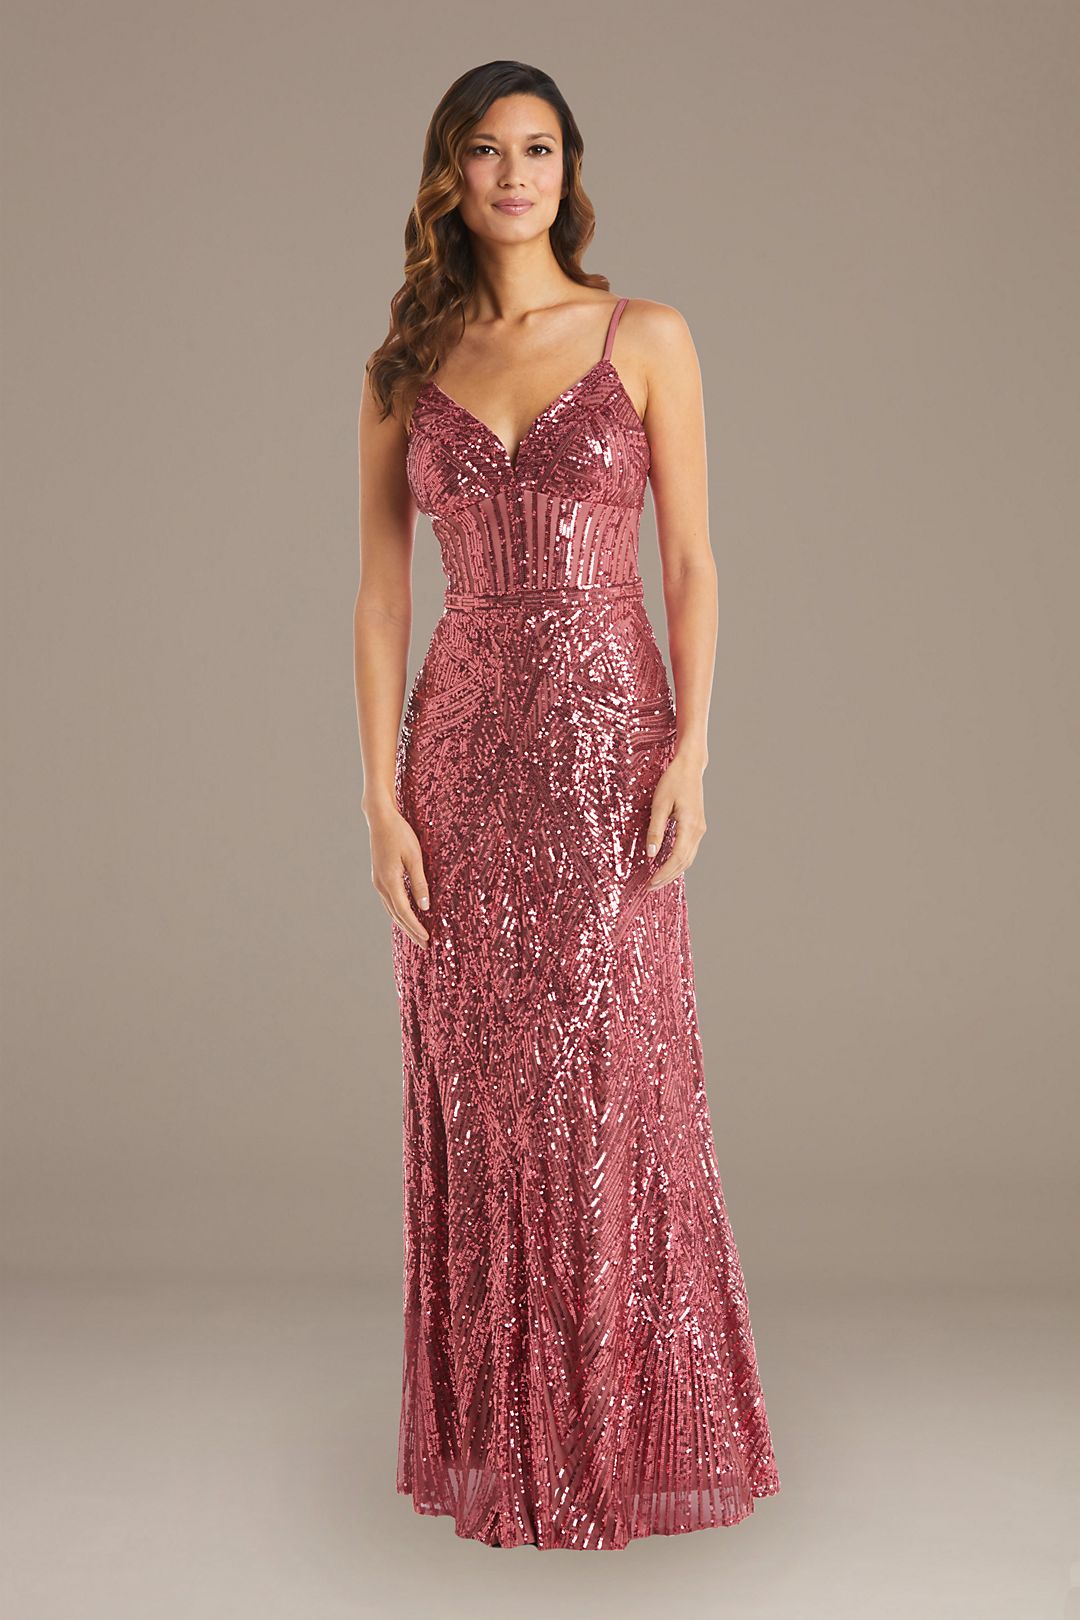 Sweetheart Sequin Party Dress with Corset Bodice Image 4